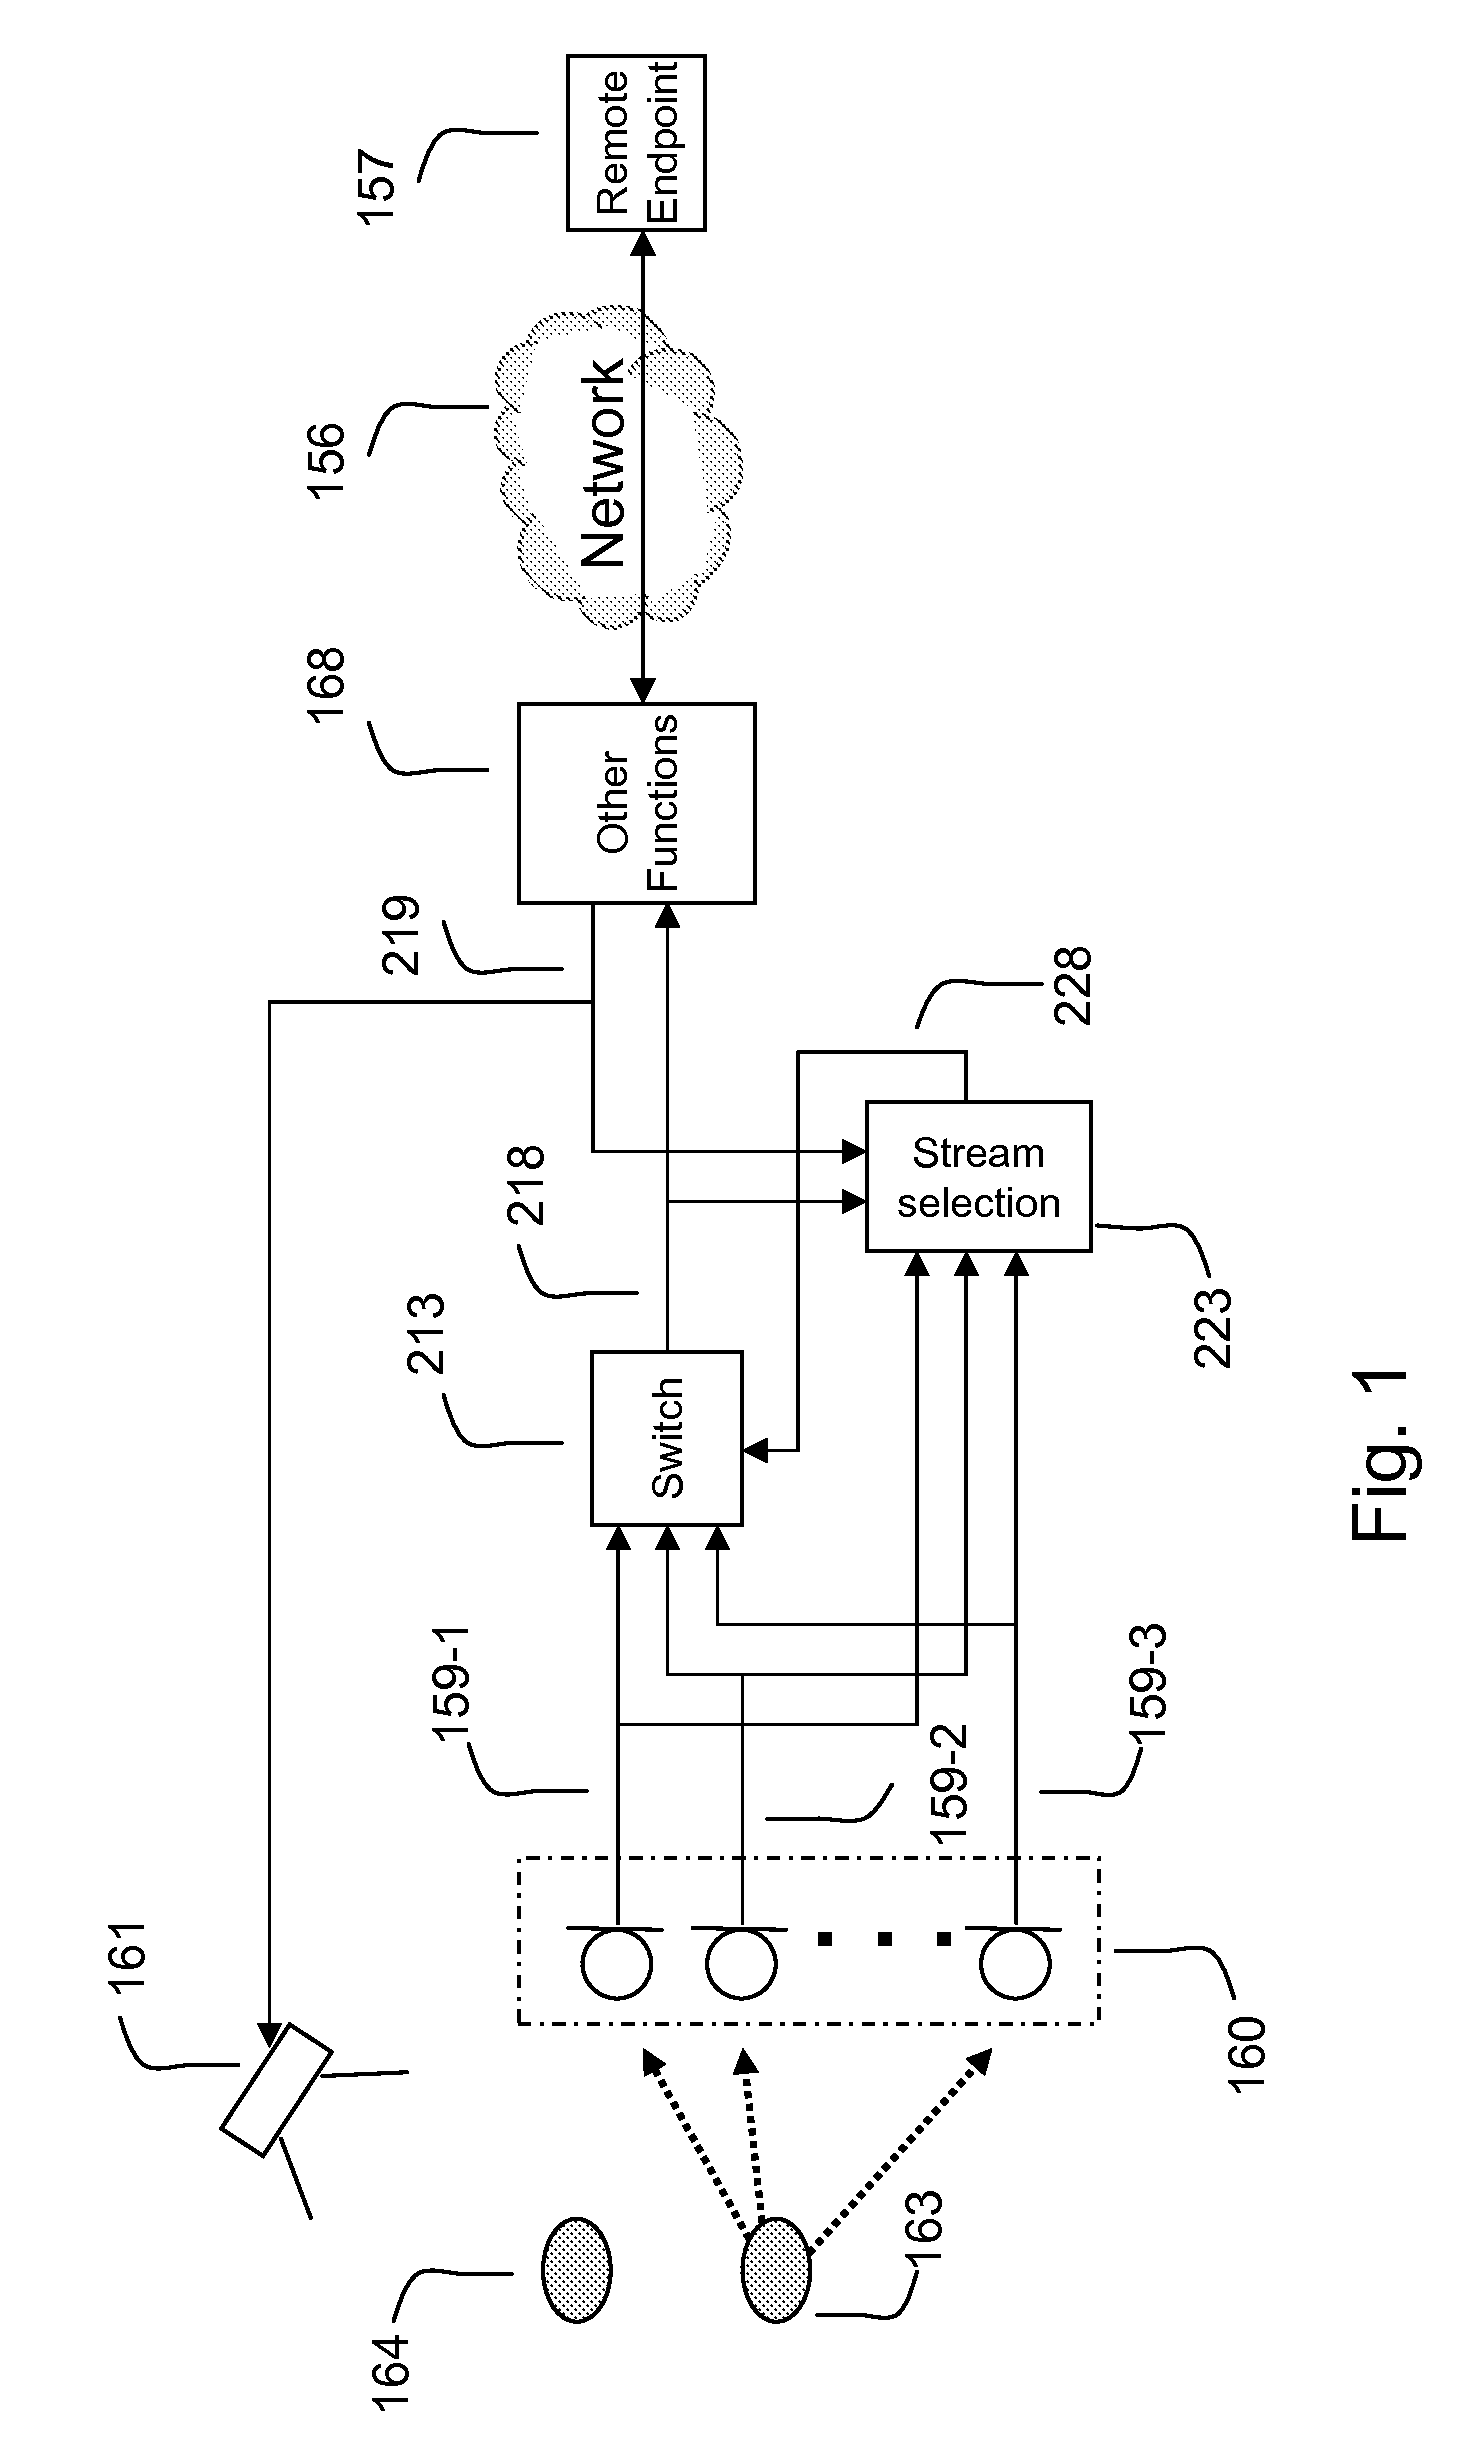 Method and apparatus for selecting an audio stream